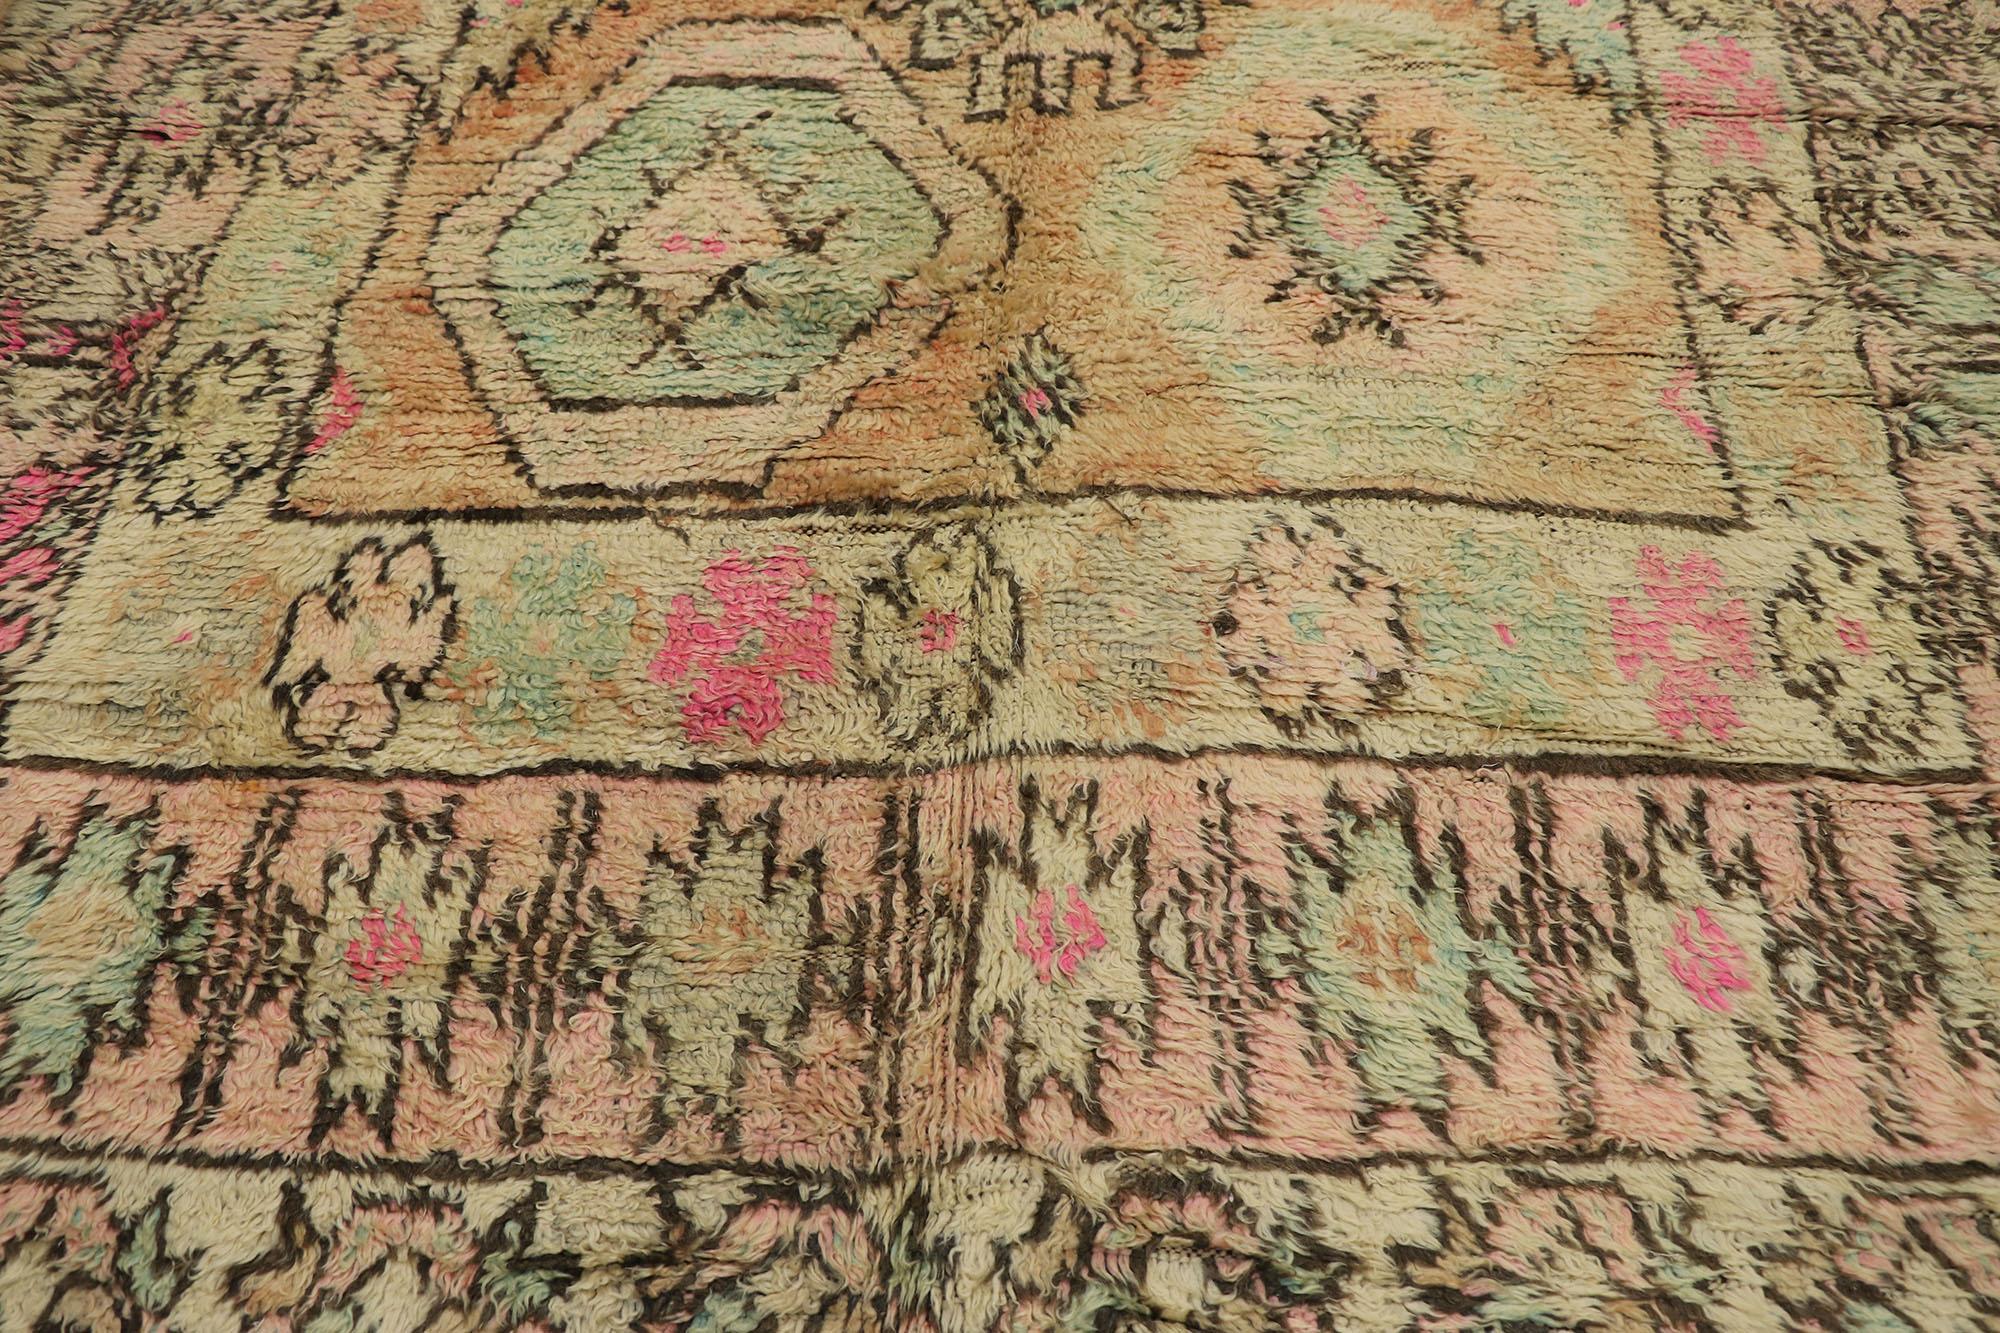 Vintage Berber Boujad Moroccan Rug with Bohemian Tribal Style In Good Condition For Sale In Dallas, TX